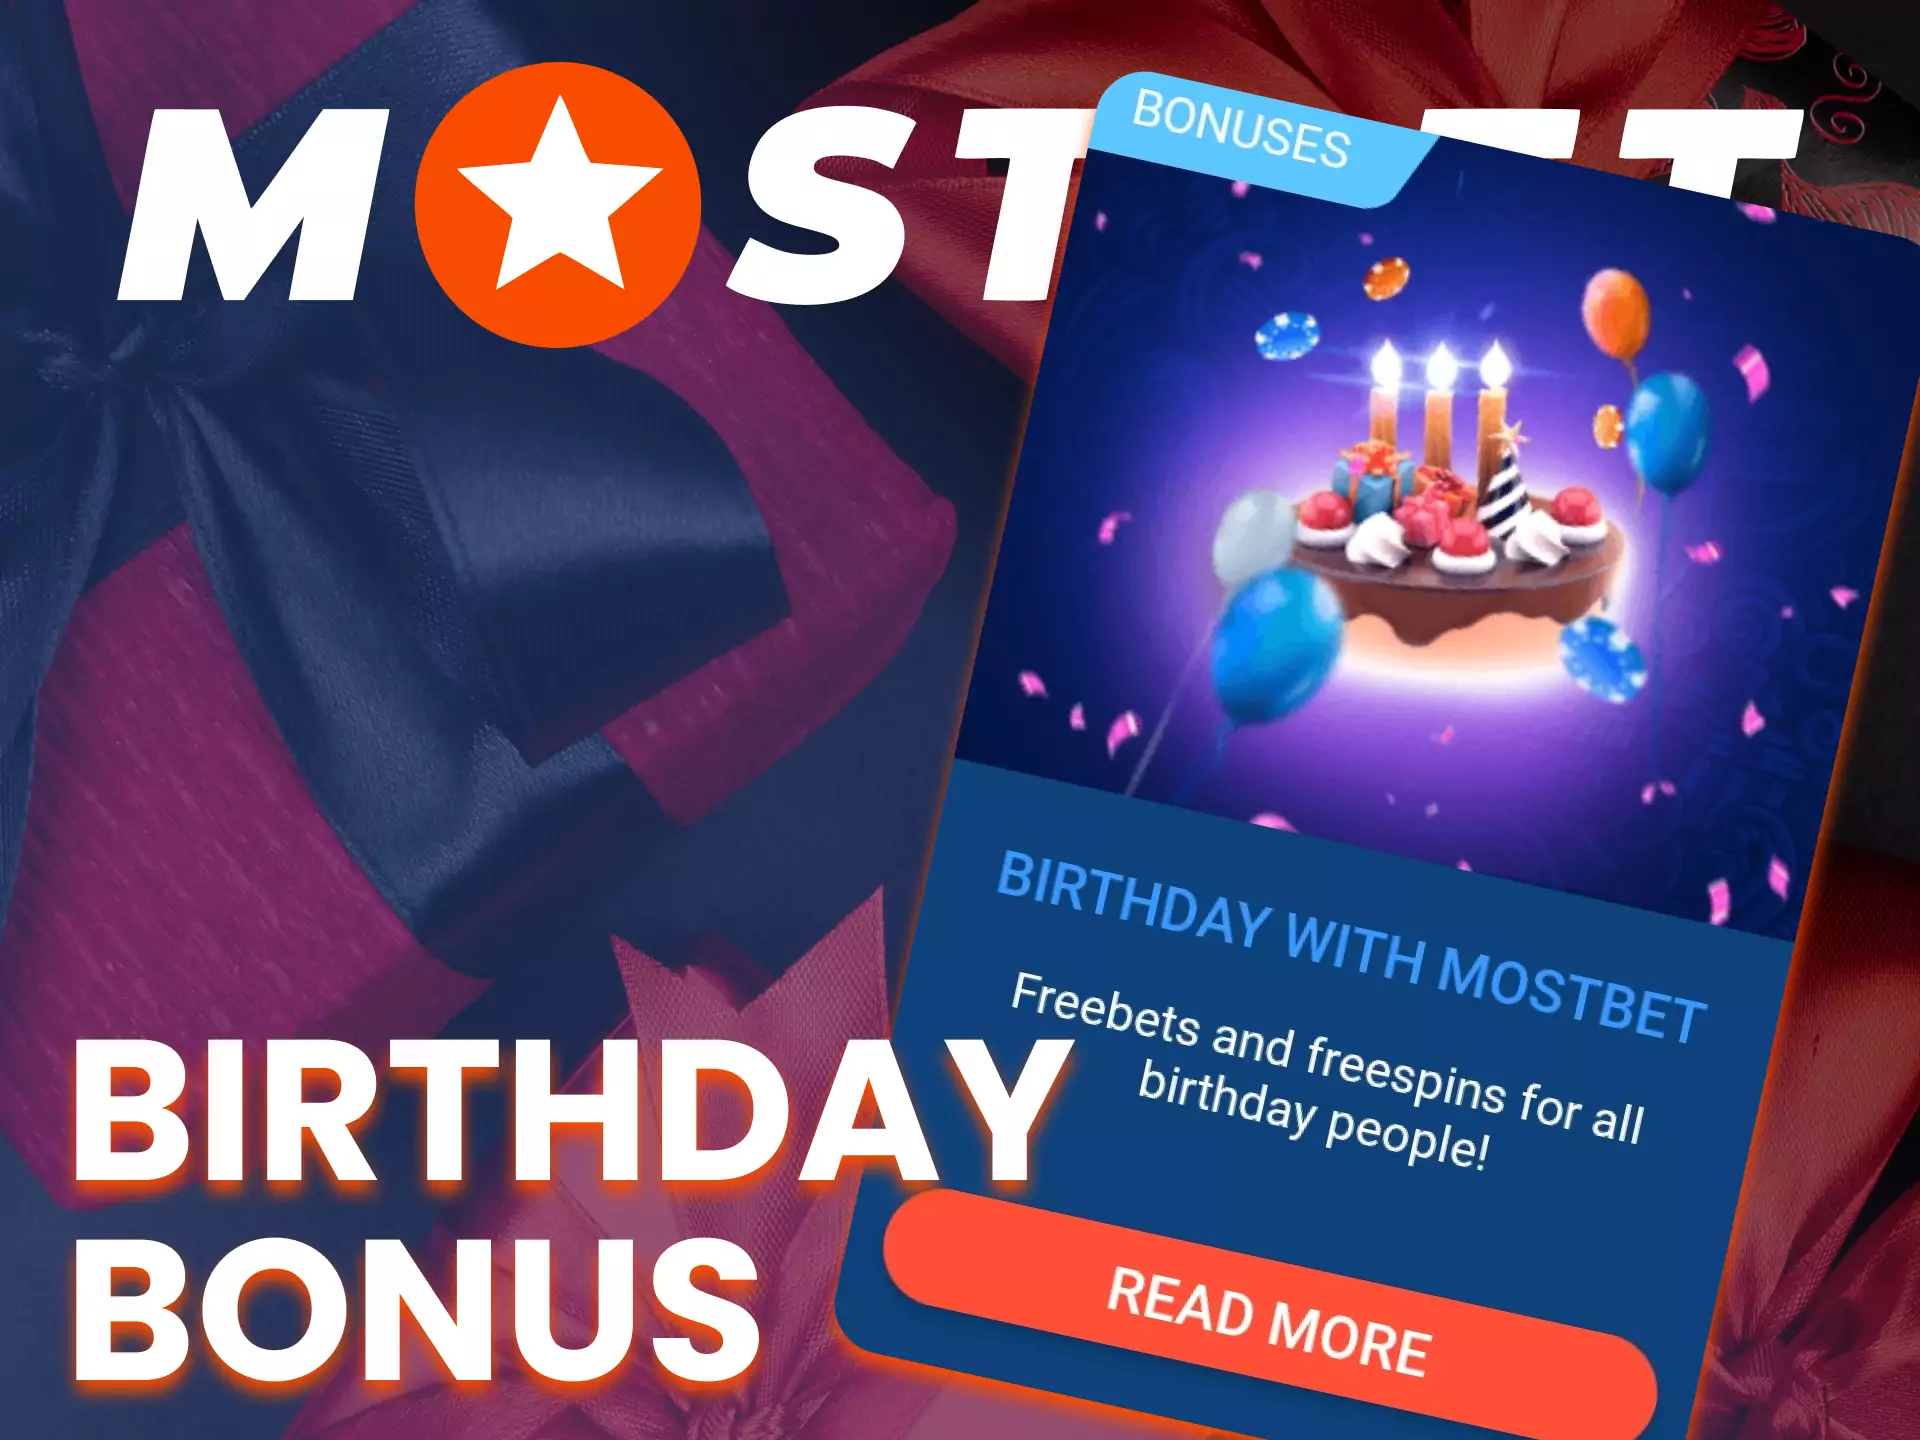 If it's your birthday get a bonus from Mostbet app.